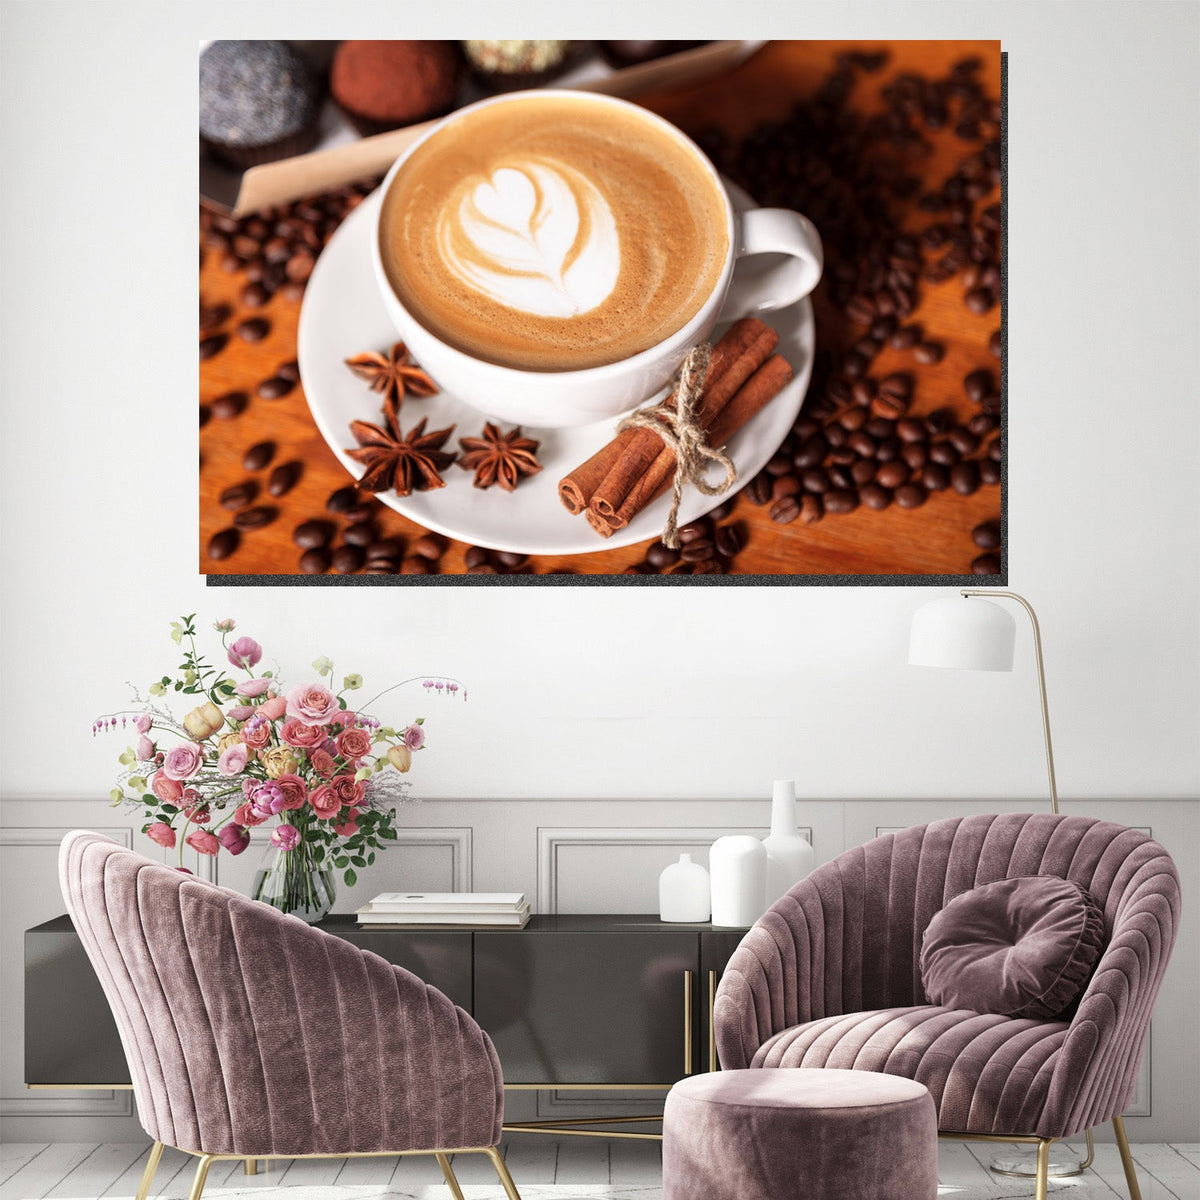 https://cdn.shopify.com/s/files/1/0387/9986/8044/products/SpiceitupwithCoffeeCanvasArtprintStretched-2.jpg